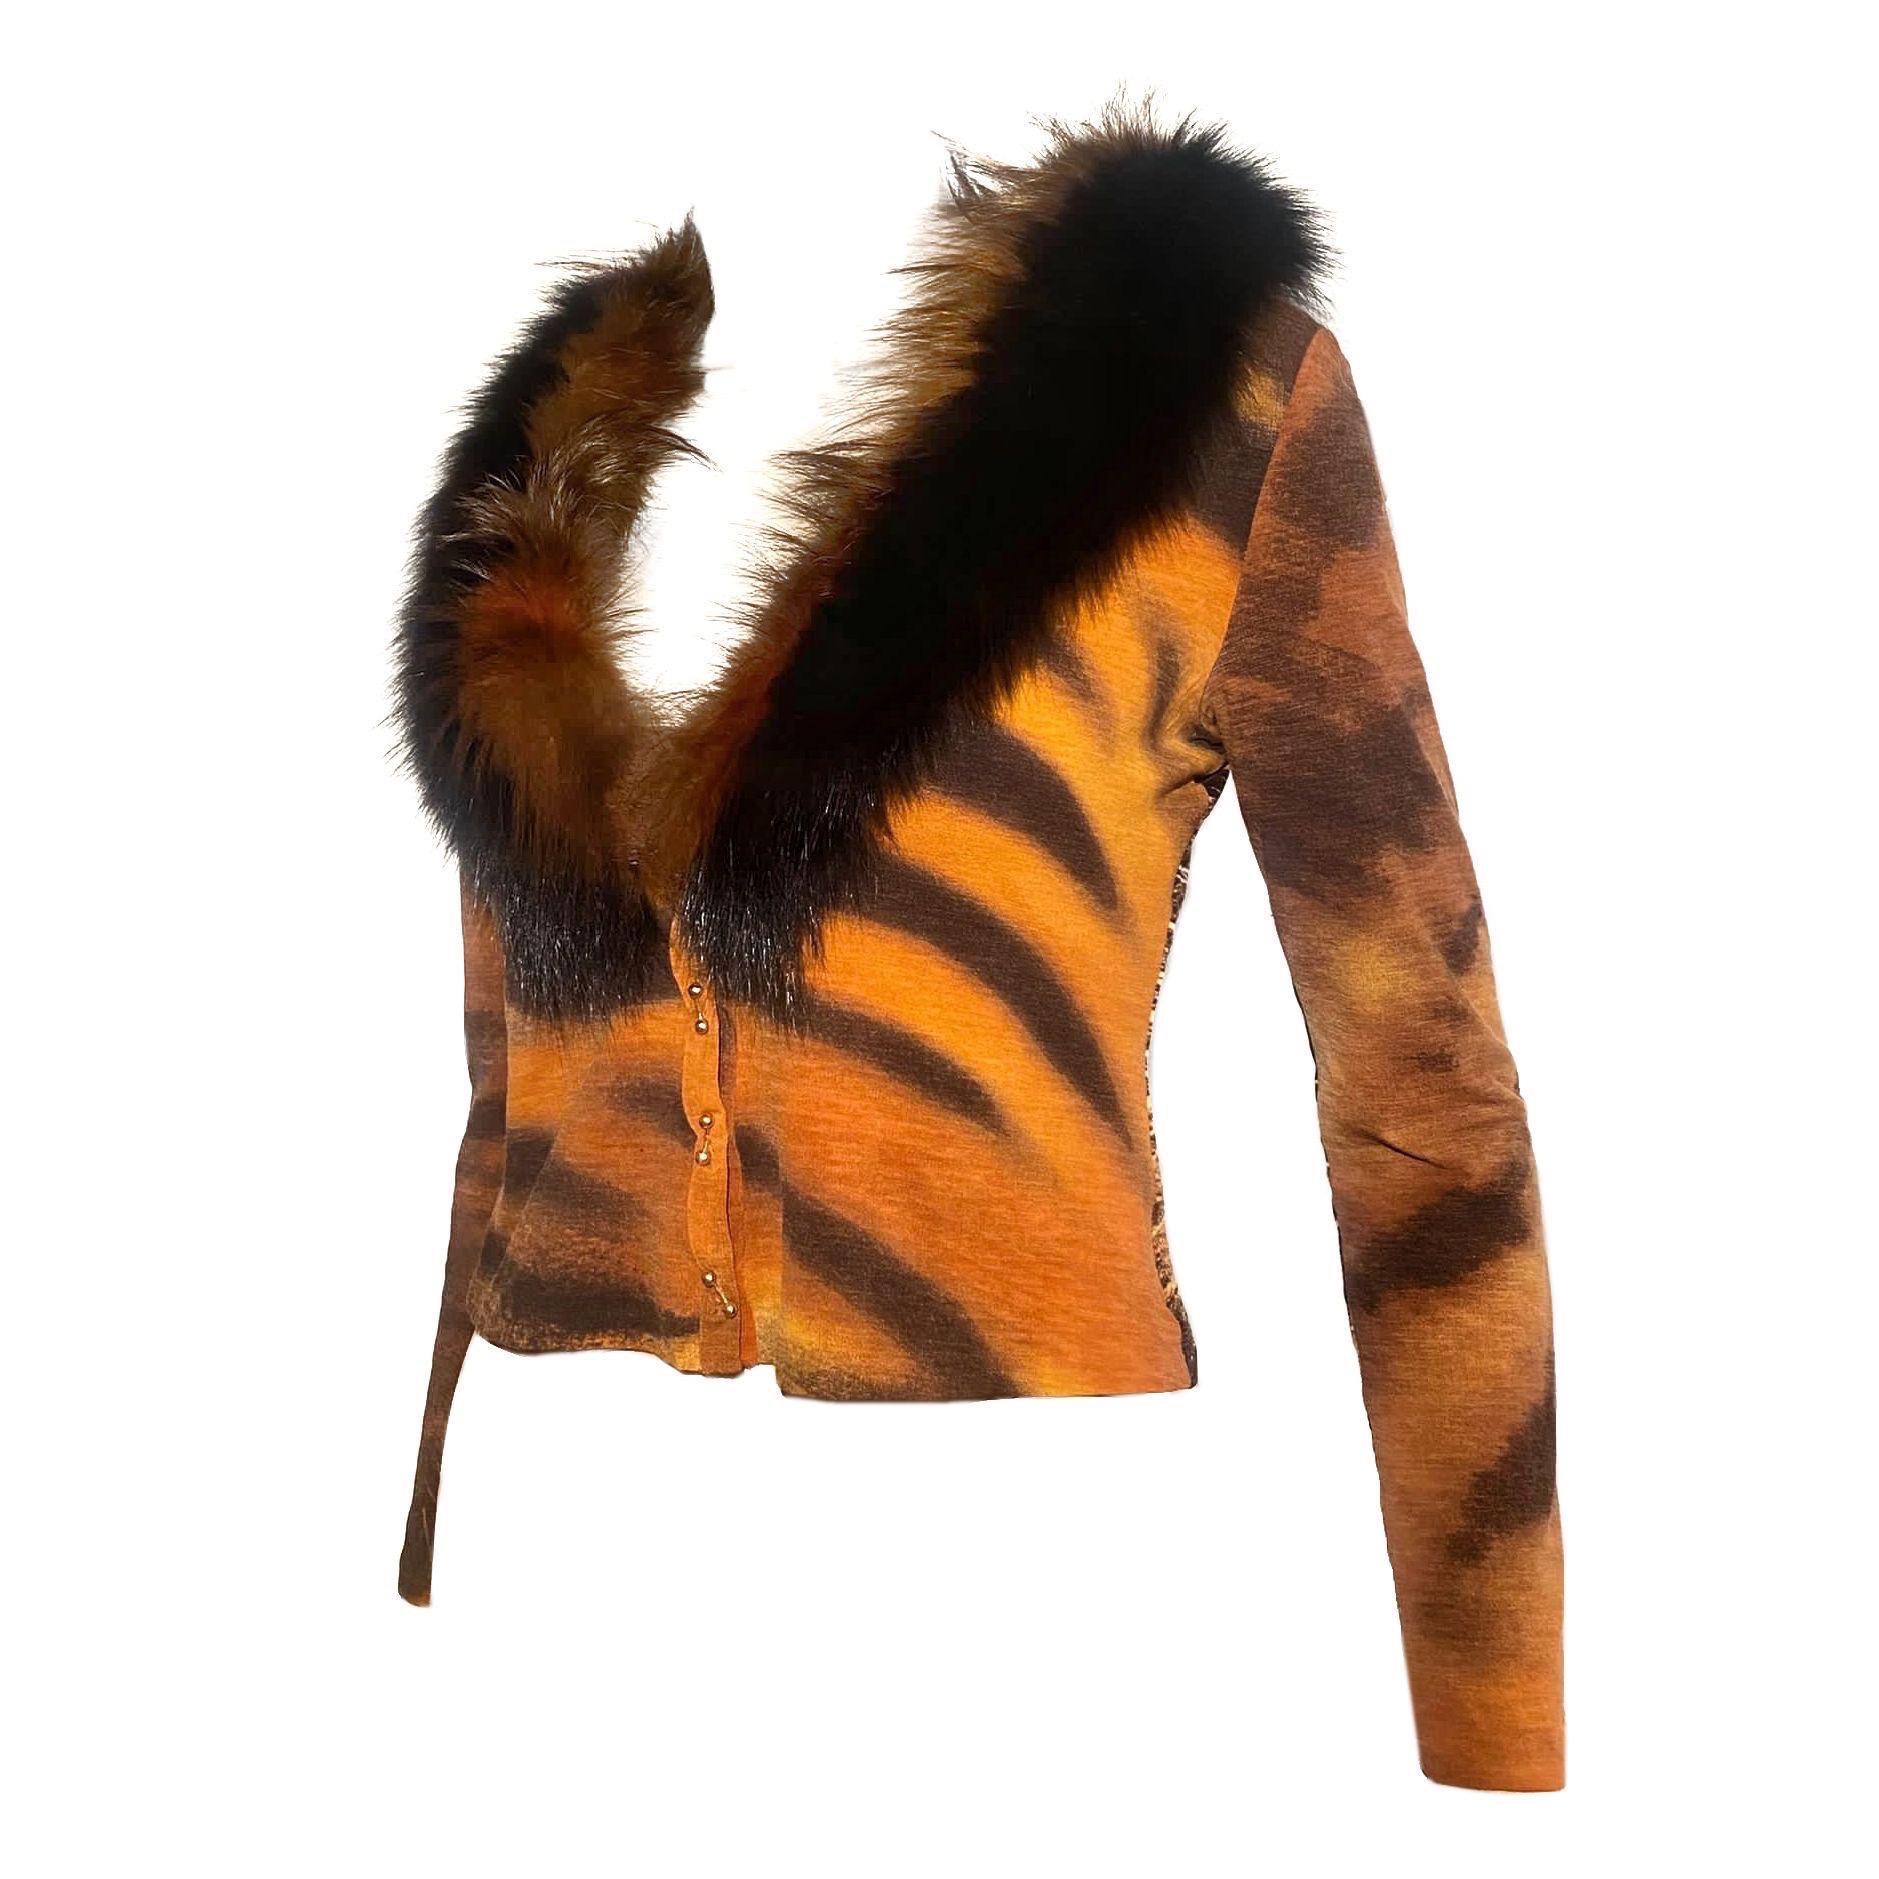 Roberto Cavalli wool knit cardigan with gold buttons and fur trim, featuring the Tiger print from the Fall/Winter 2000 collection.

Size M

Shoulder to shoulder: 39 cm / 15,3 inch
Pit to pit: 40 cm / 15,7 inch 
Sleeve length (from shoulder) : 52.5